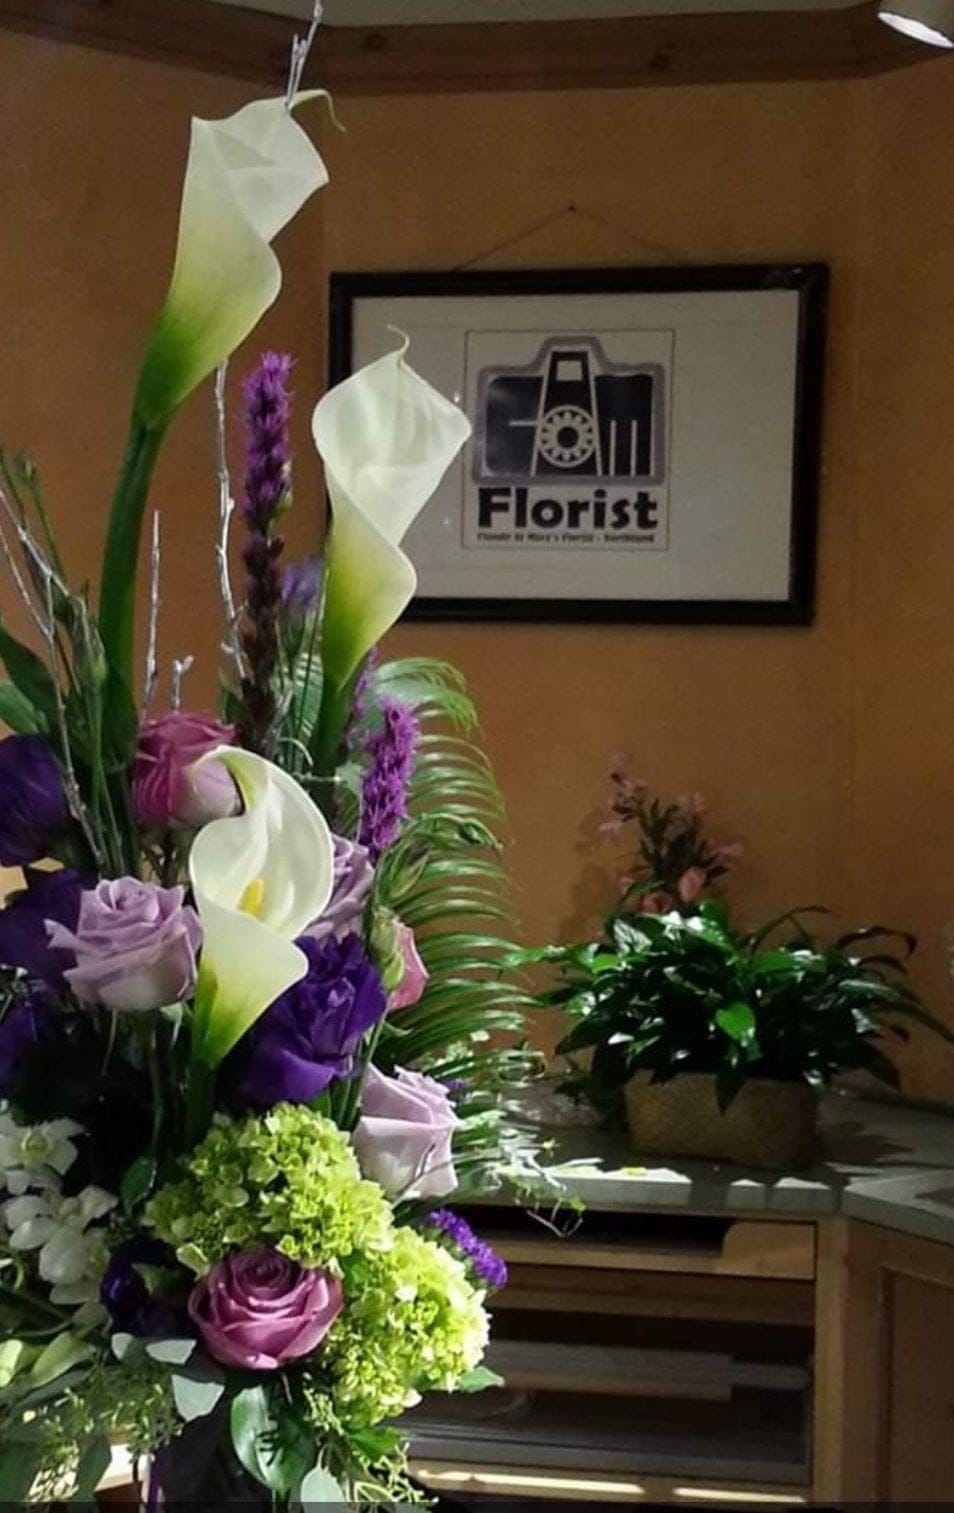 "It's click and mortar," said florist and native Detroiter Claude Thompson, who does business as CAM-Florist, about the method he uses to provide customers with online visual previews of his work.